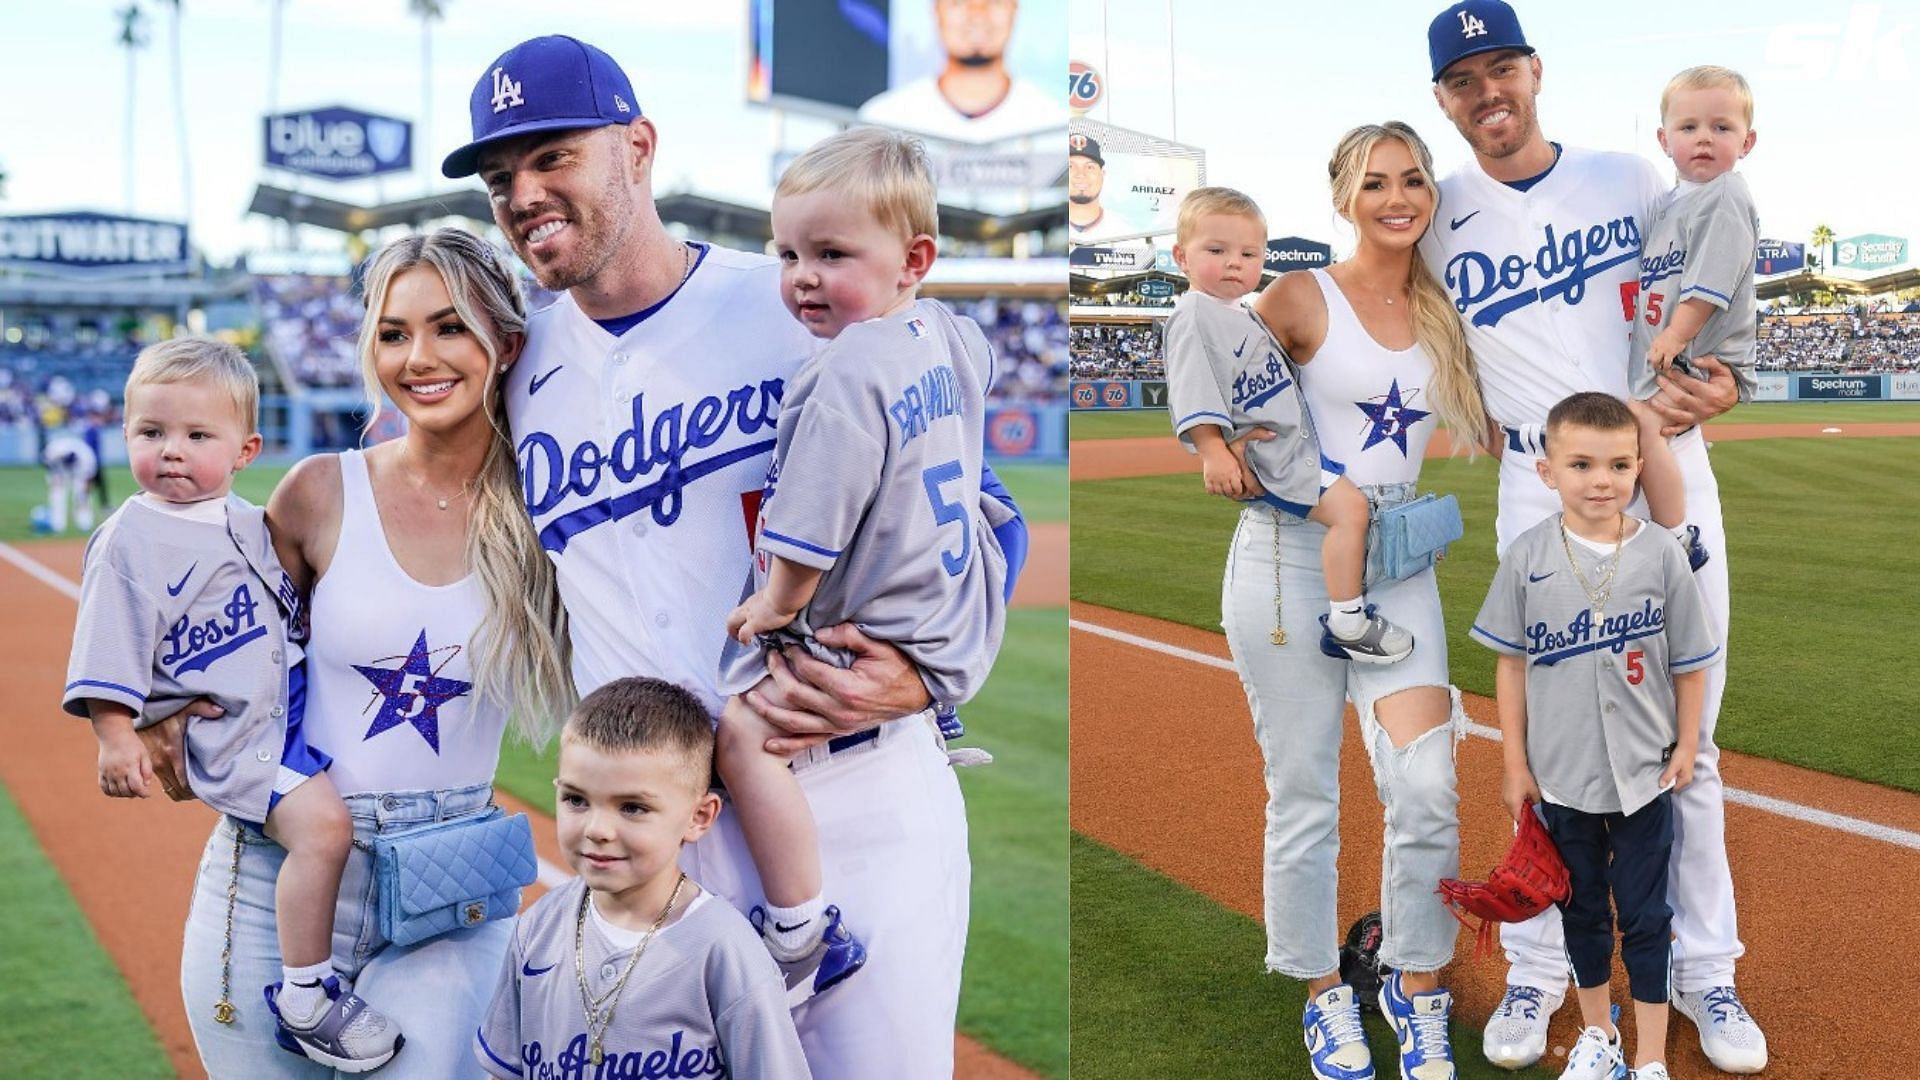 Chelsea Freeman on her husband being a World Series champion 